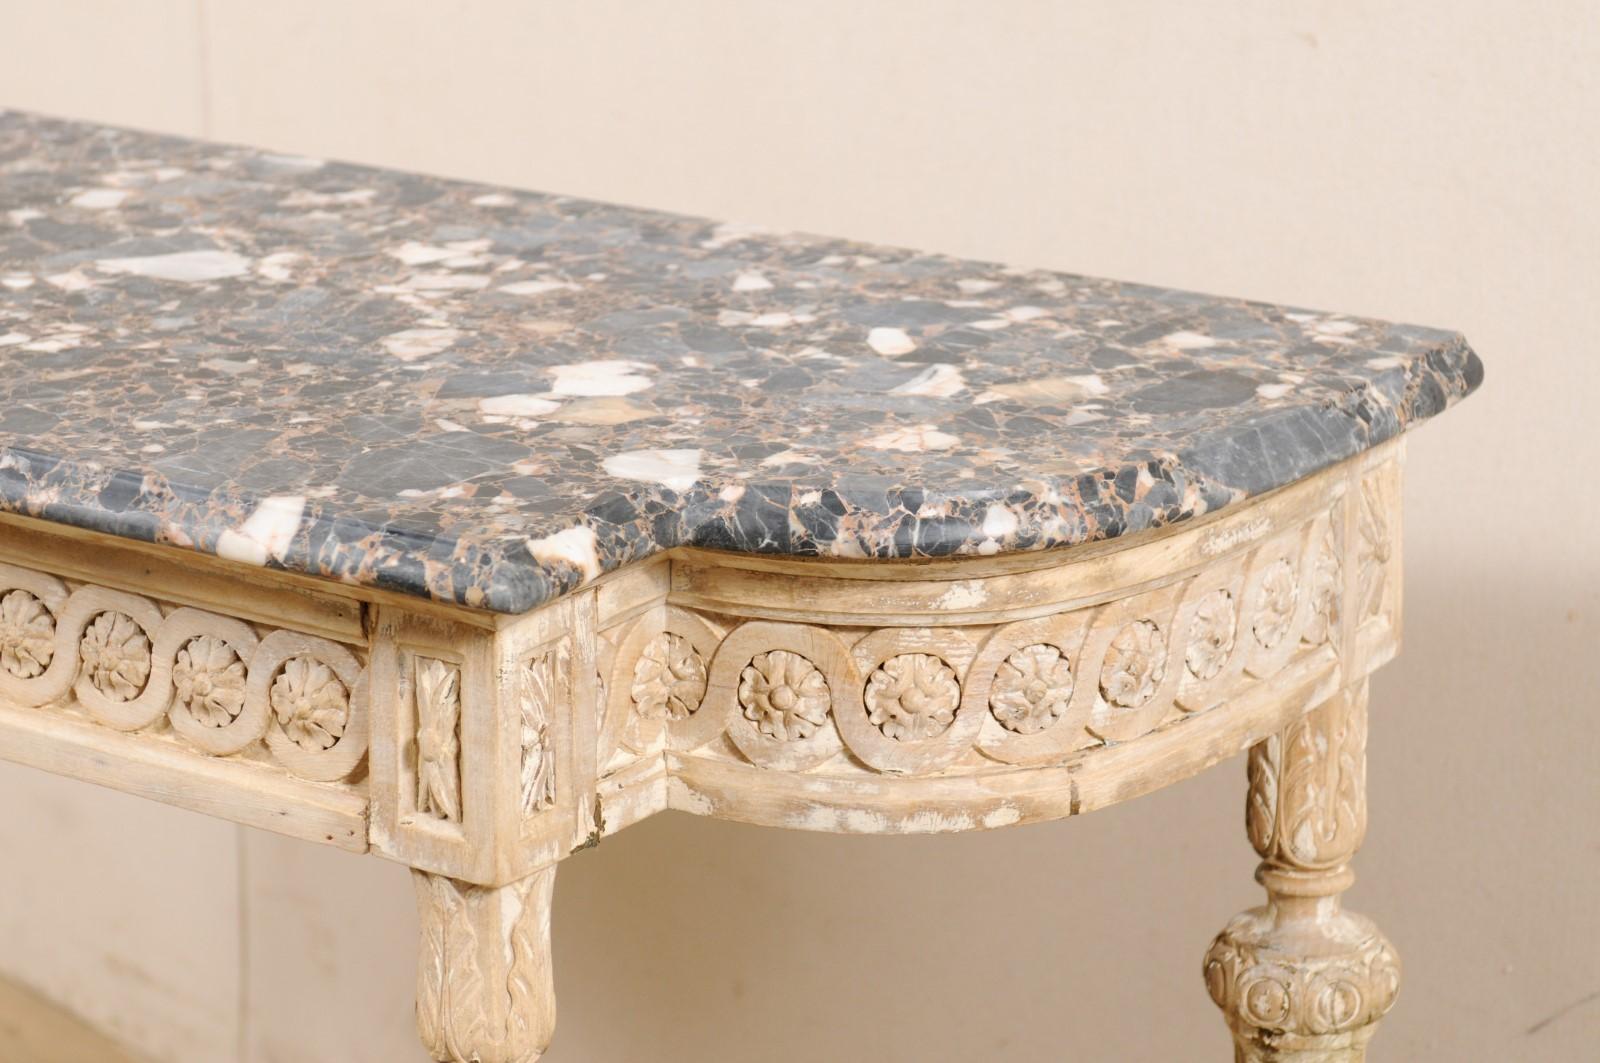 Antique French Marble-Top Console Table with Carved Urn & Foliage at Underside 1